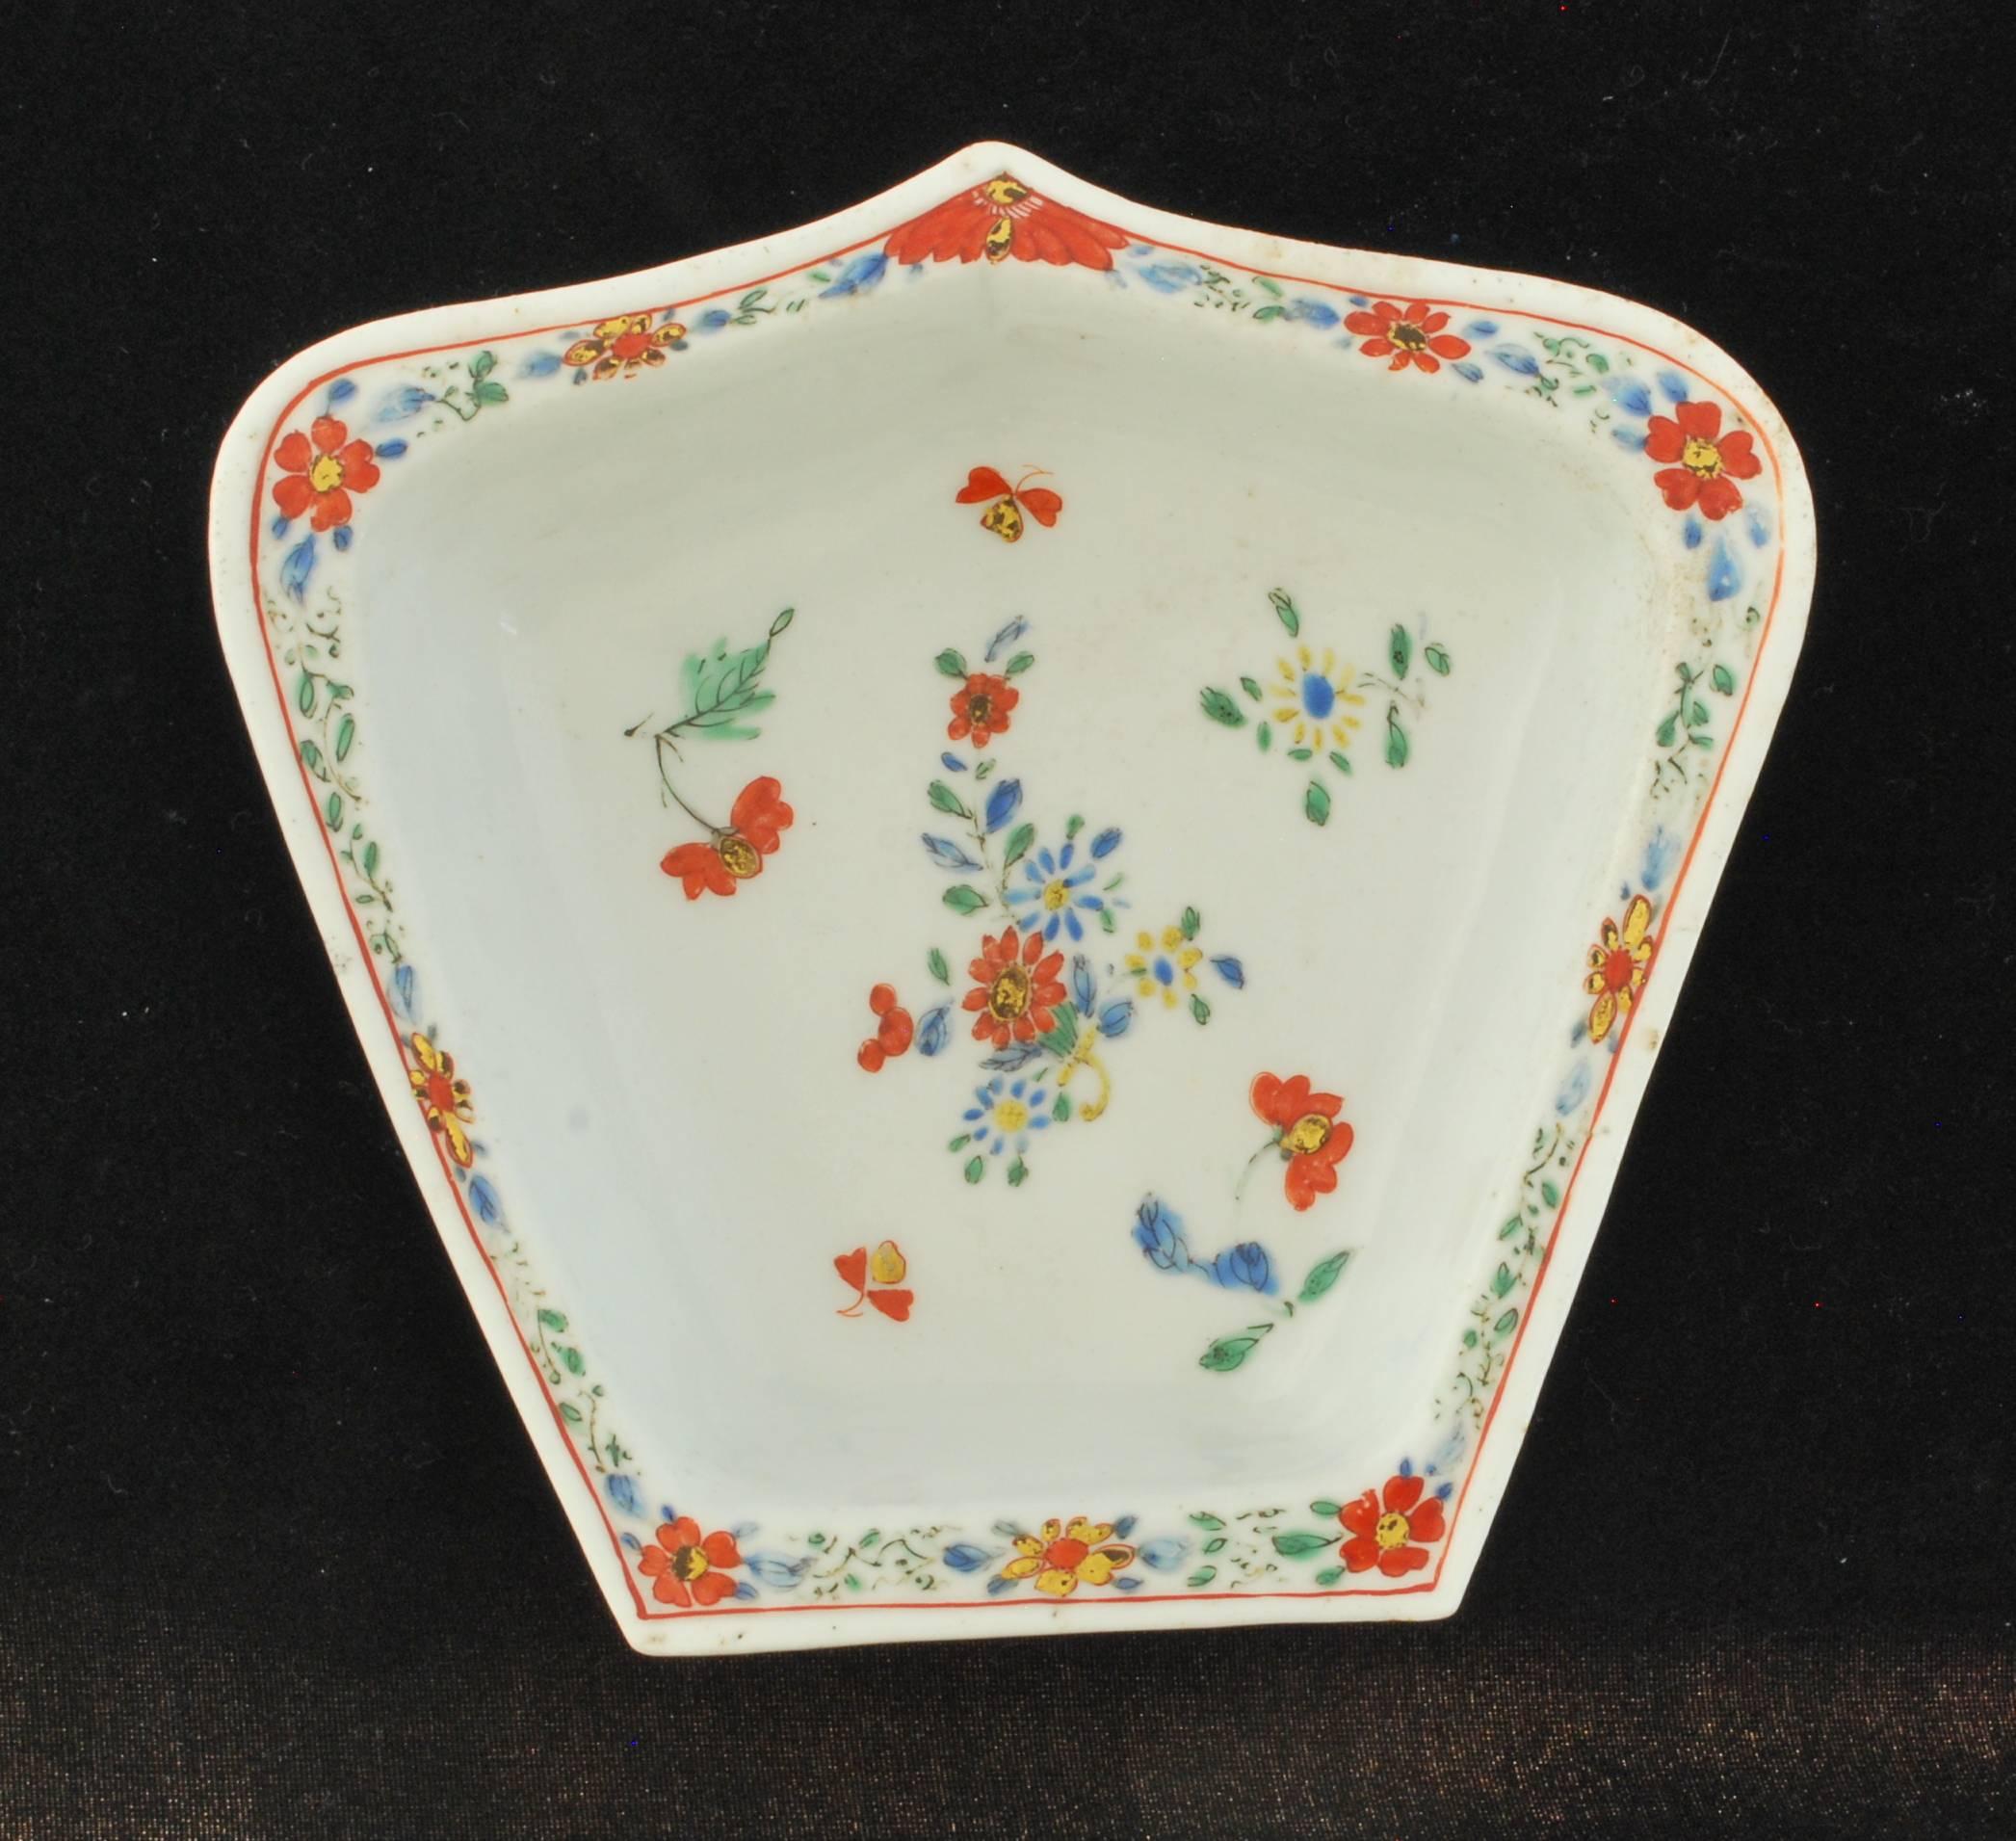 An ogival form dish, decorated after the Kakiemon. The dish is one from a presumed set of eight plus an octagonal central dish, all after a Kangxi hors d'oeuvre, sweetmeat, or condiment set, circa 1720, devised in form as a stylised eight-petalled